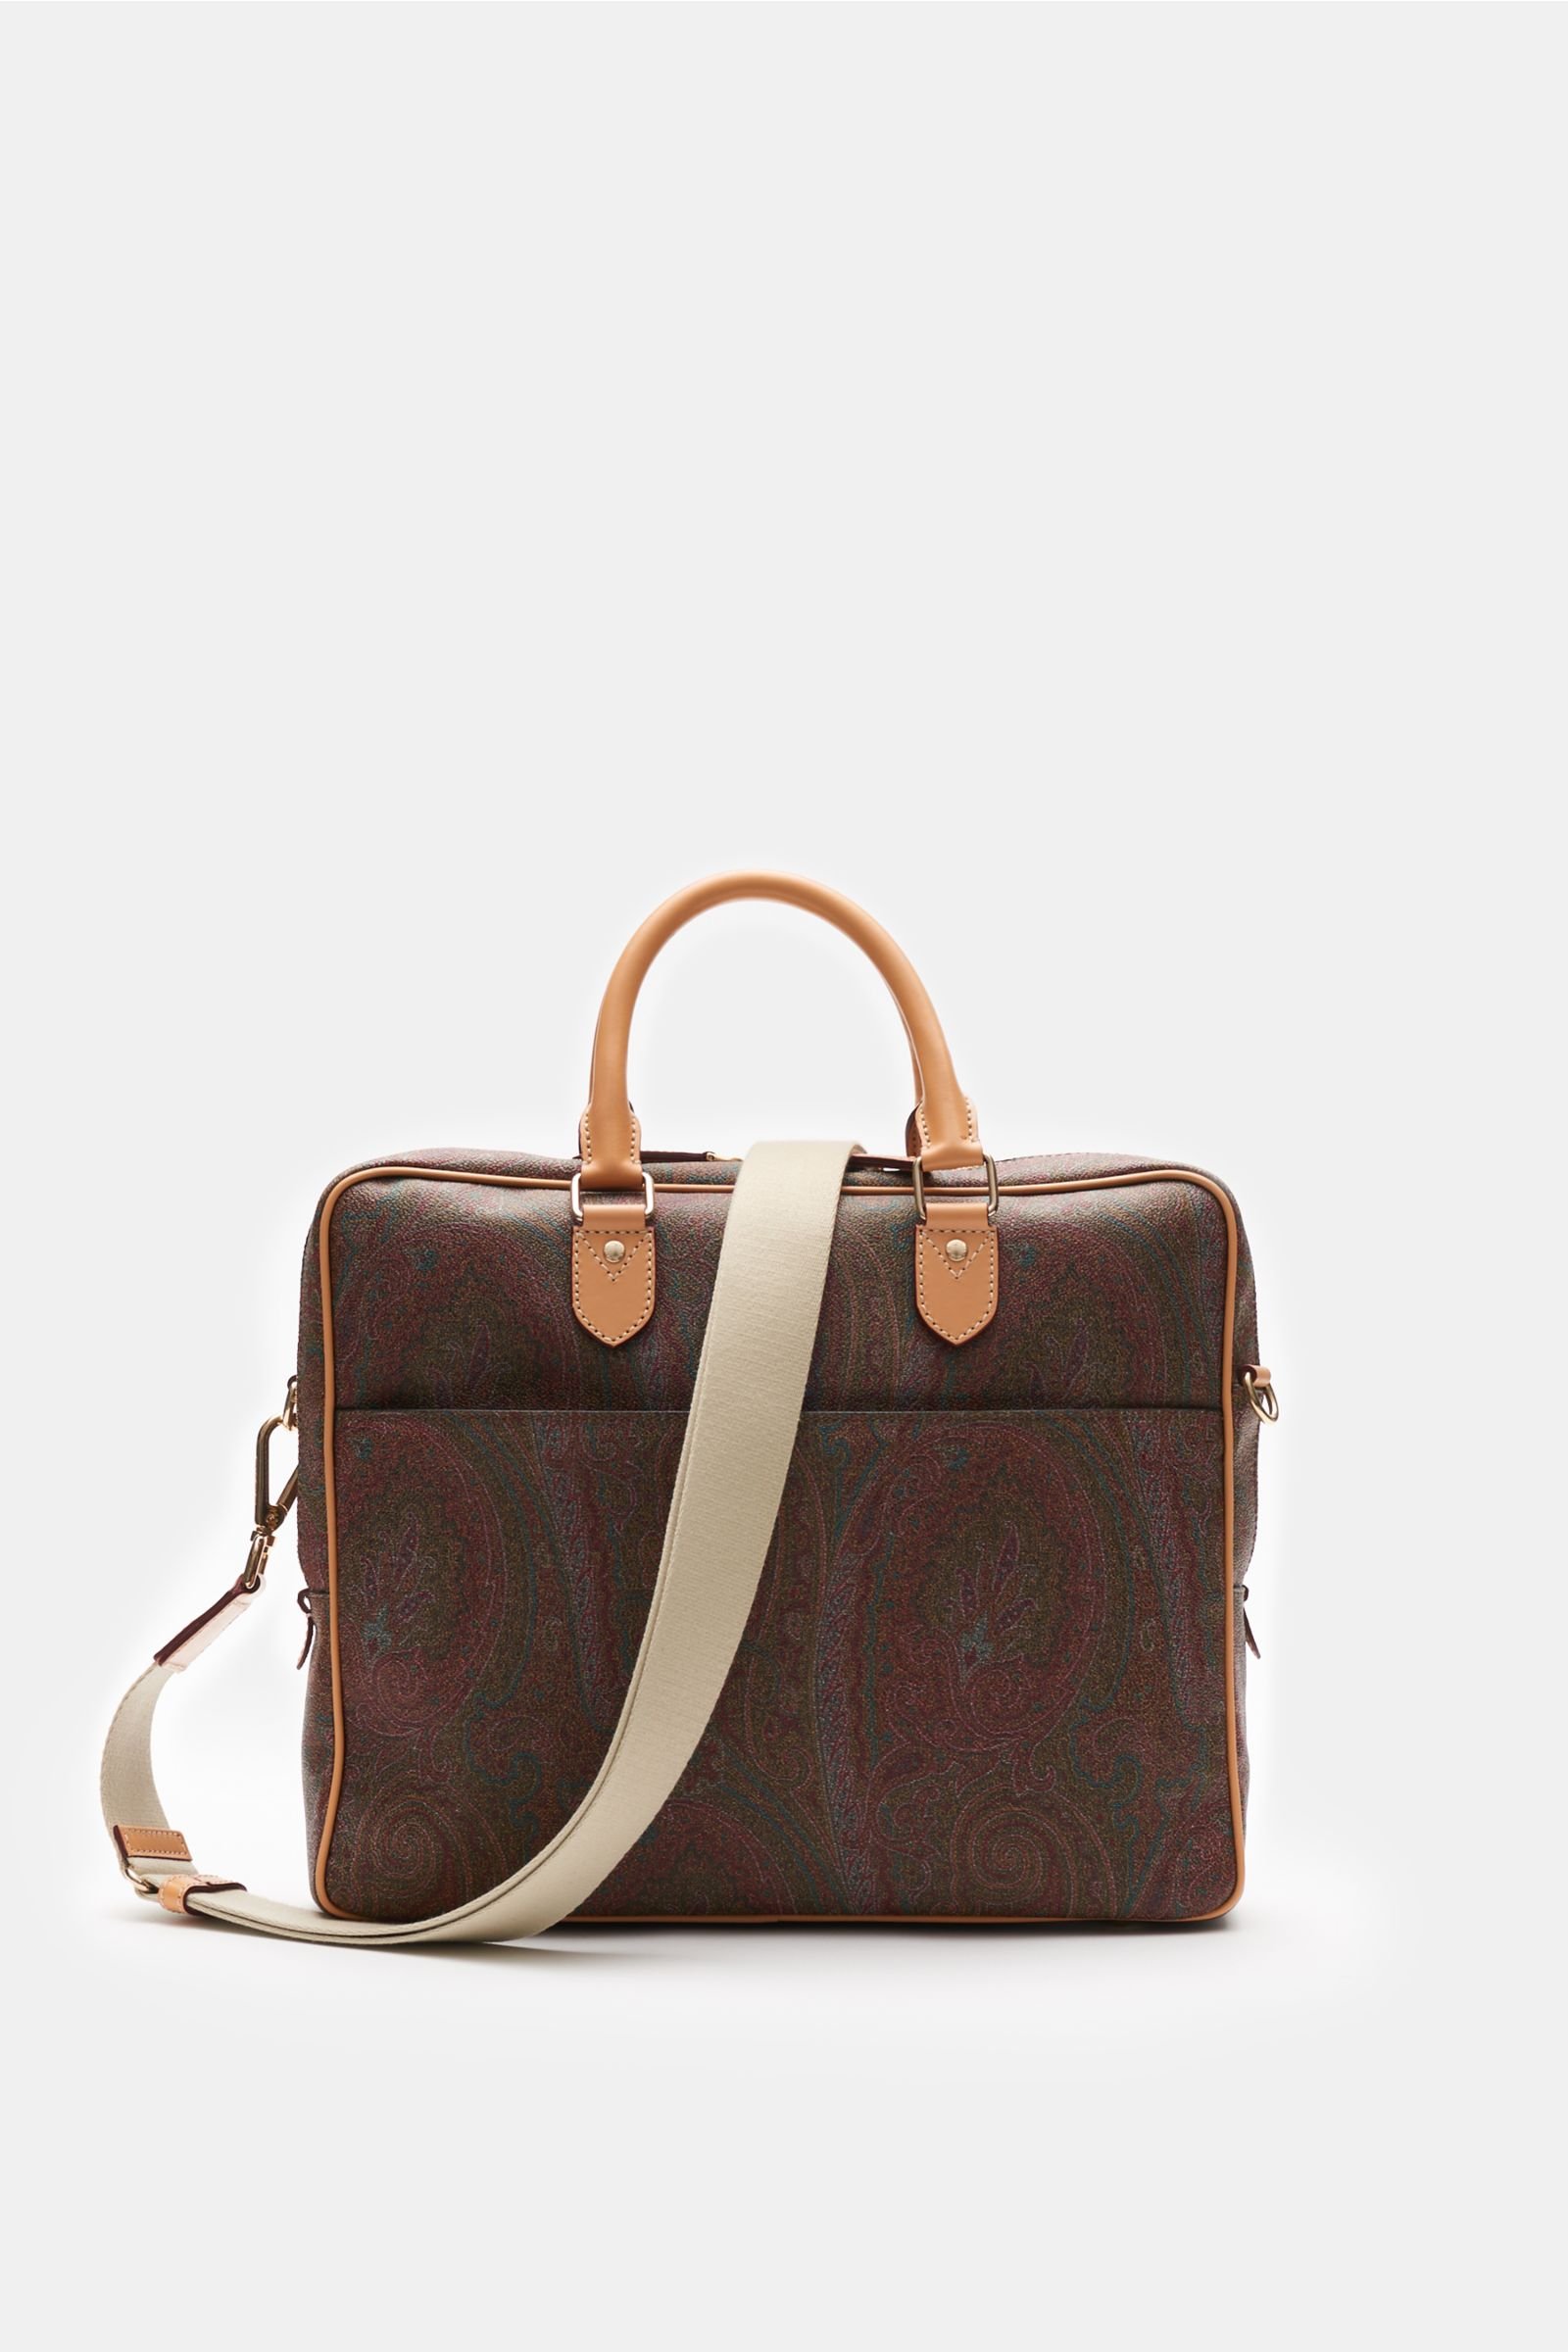 Briefcase brown patterned